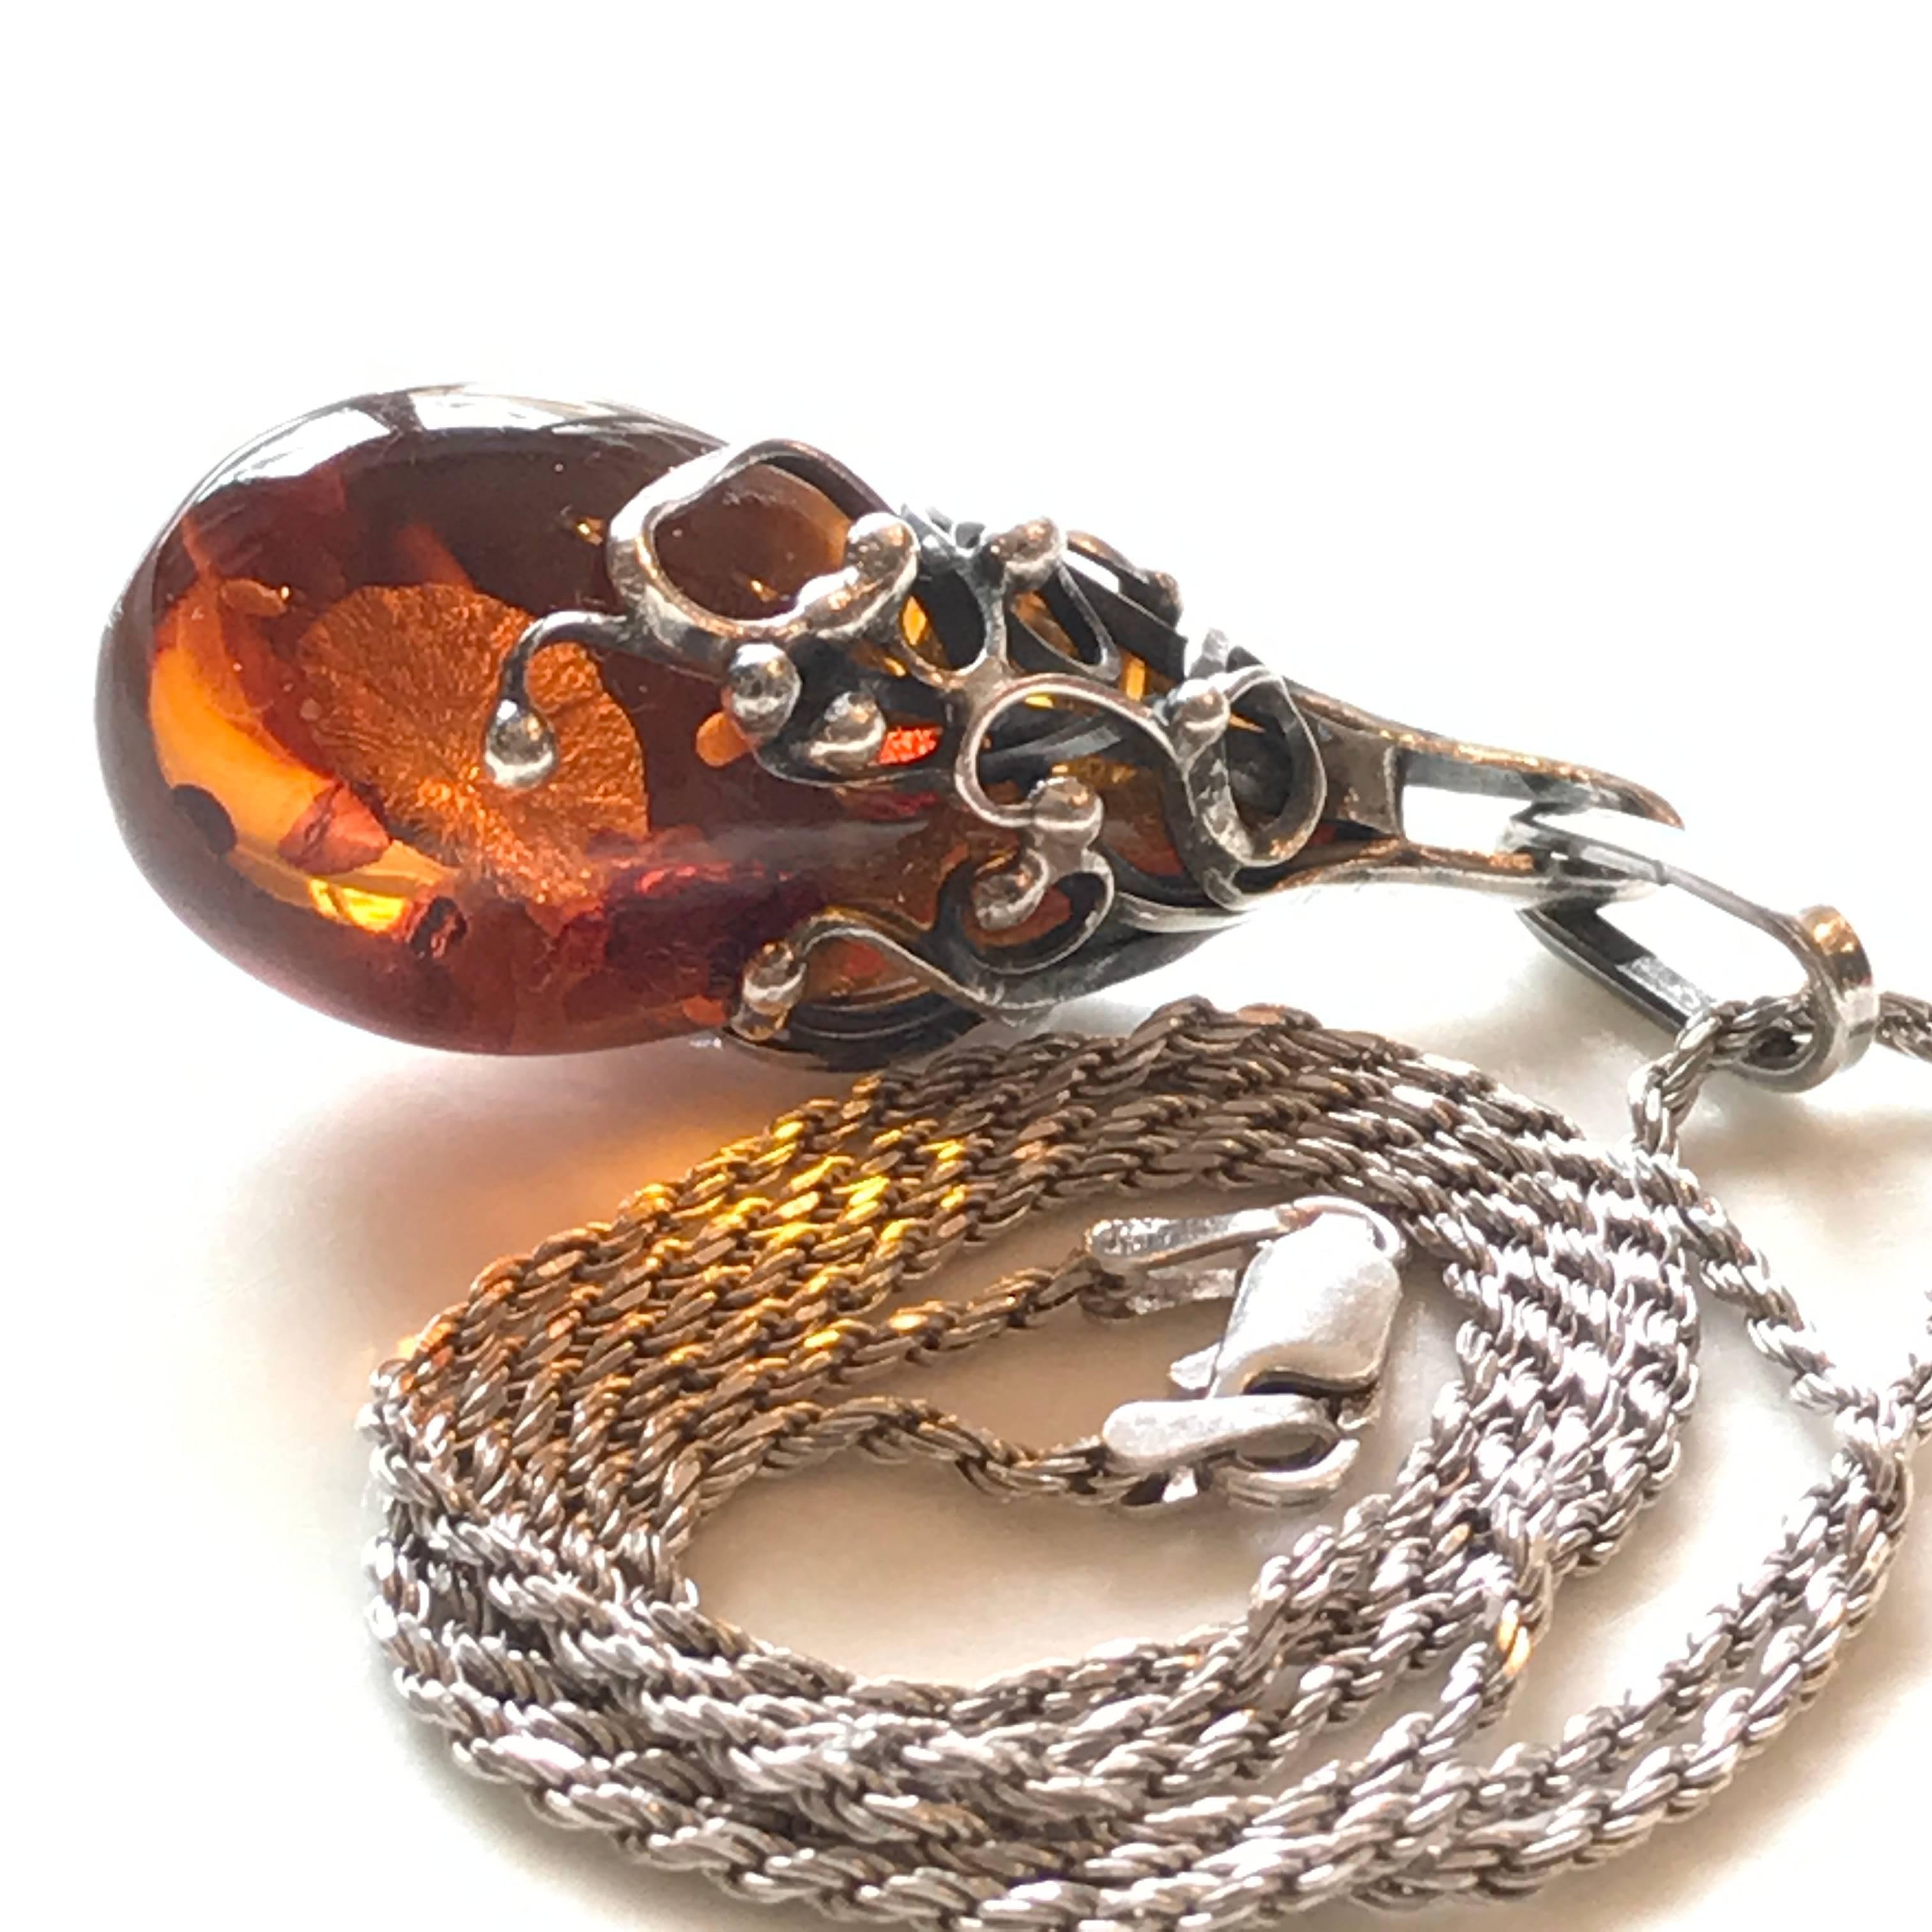 Amber pendant in a Sterling silver setting with a Italian 925 silver chain